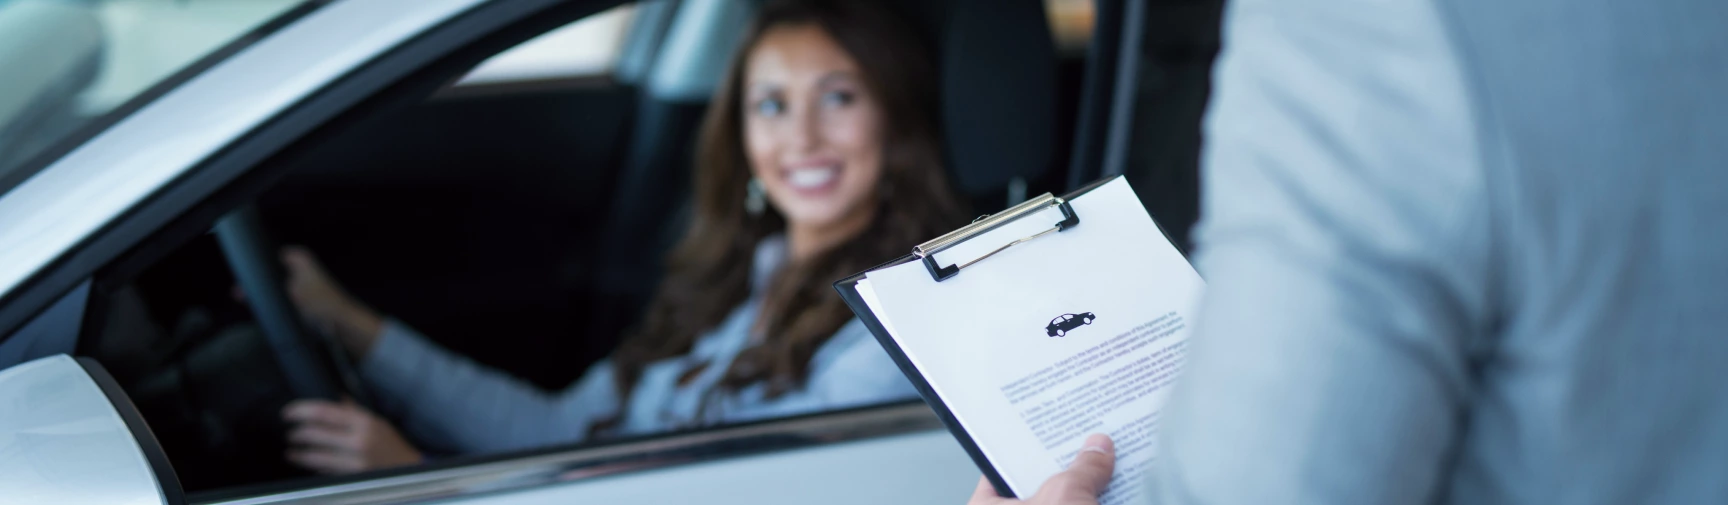 Woman in car interacting with person holding clipboard with vehicle document.